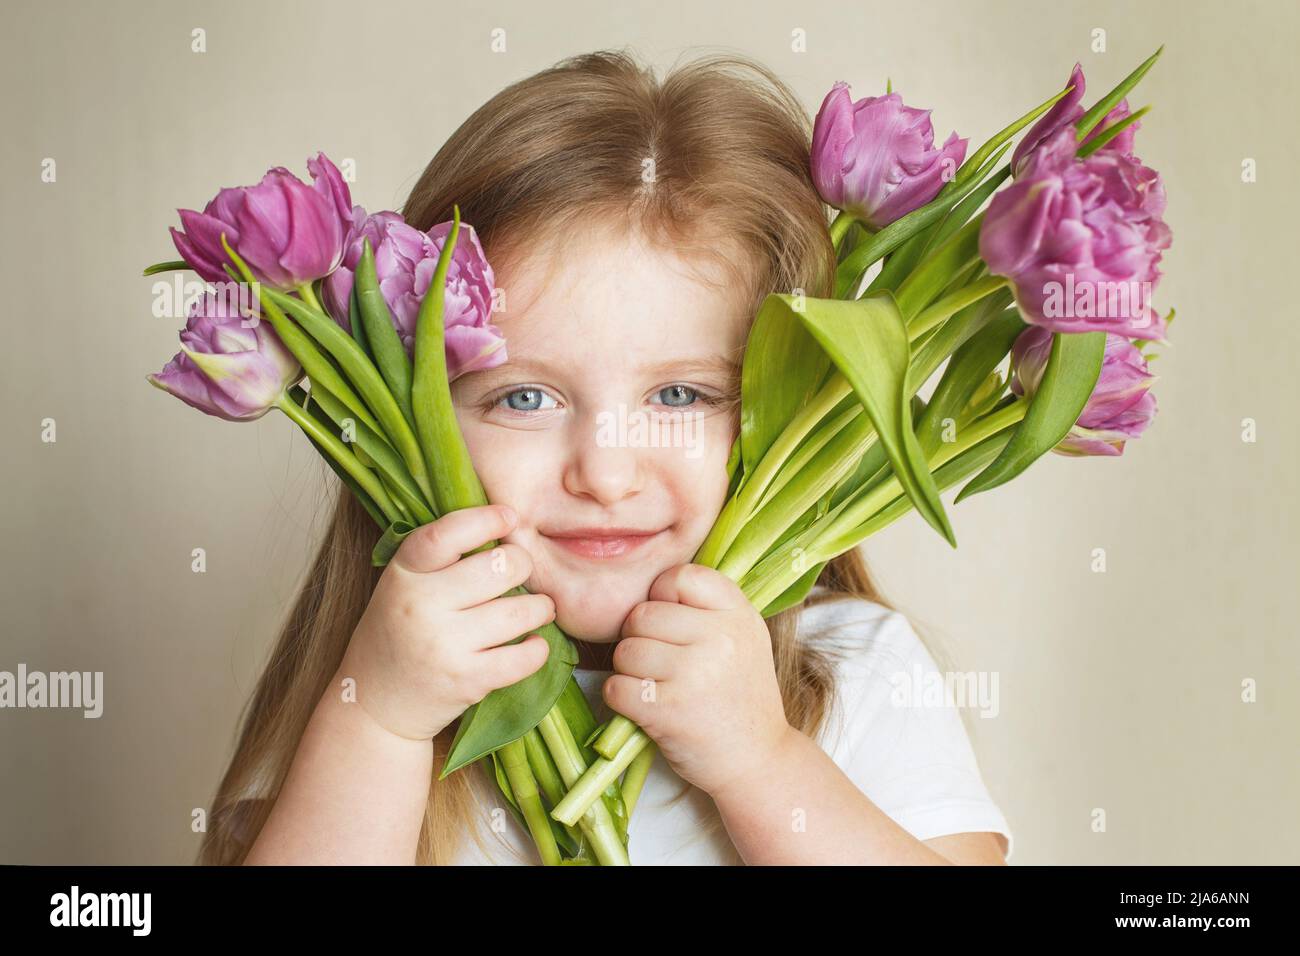 portrait of a happy smiling litlle girl with bouquet of flowers tulips in her hands Stock Photo